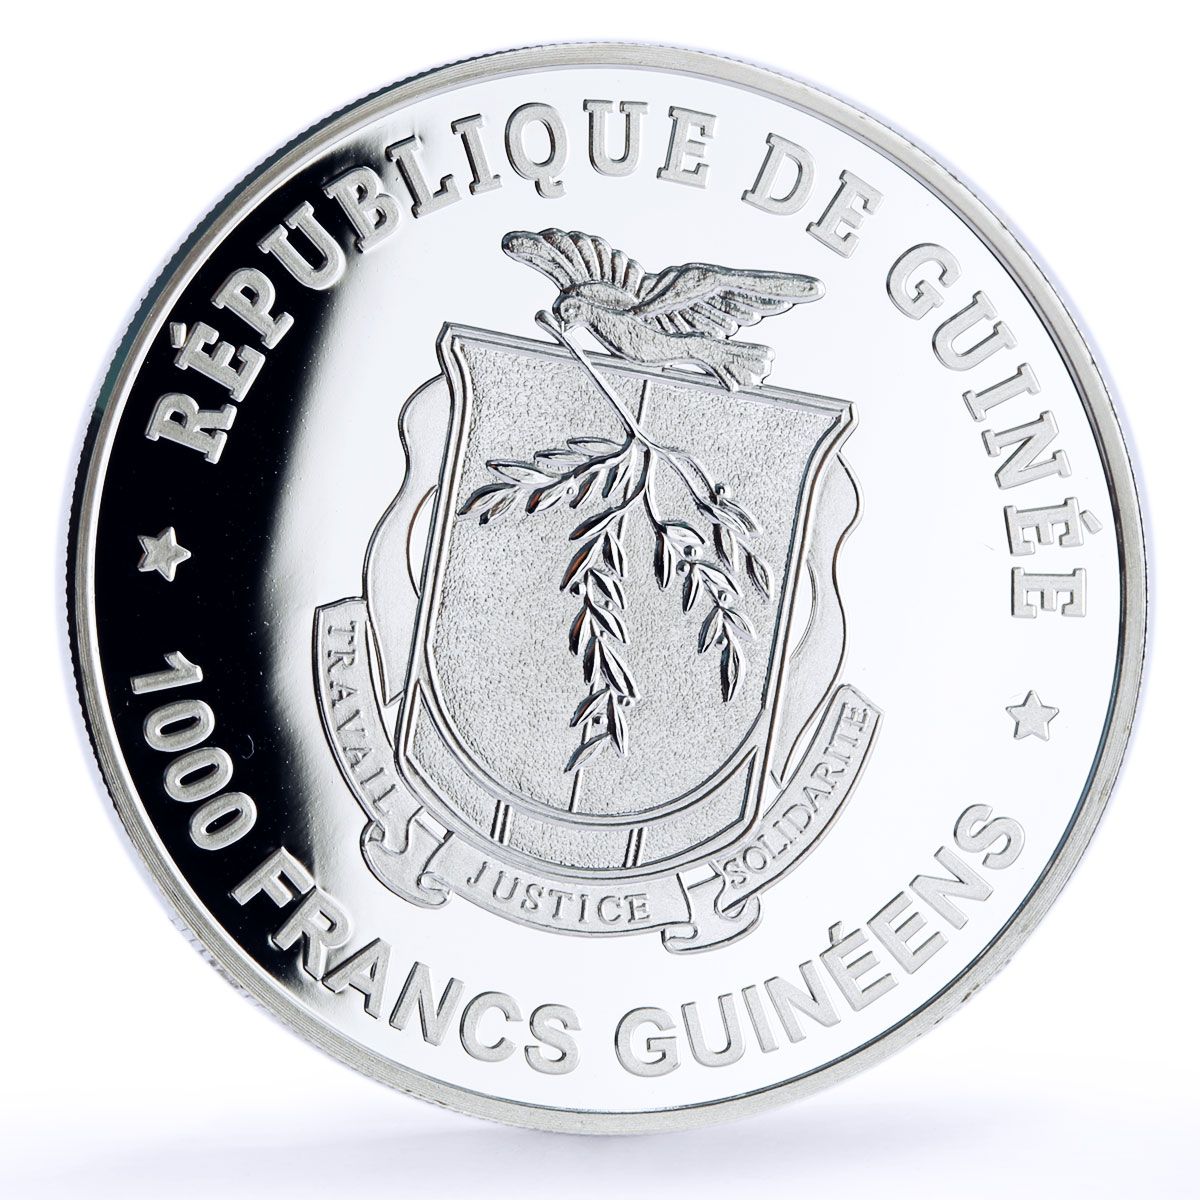 Guinea 1000 francs Seafaring Pamir Ship Clipper proof silver coin 2018